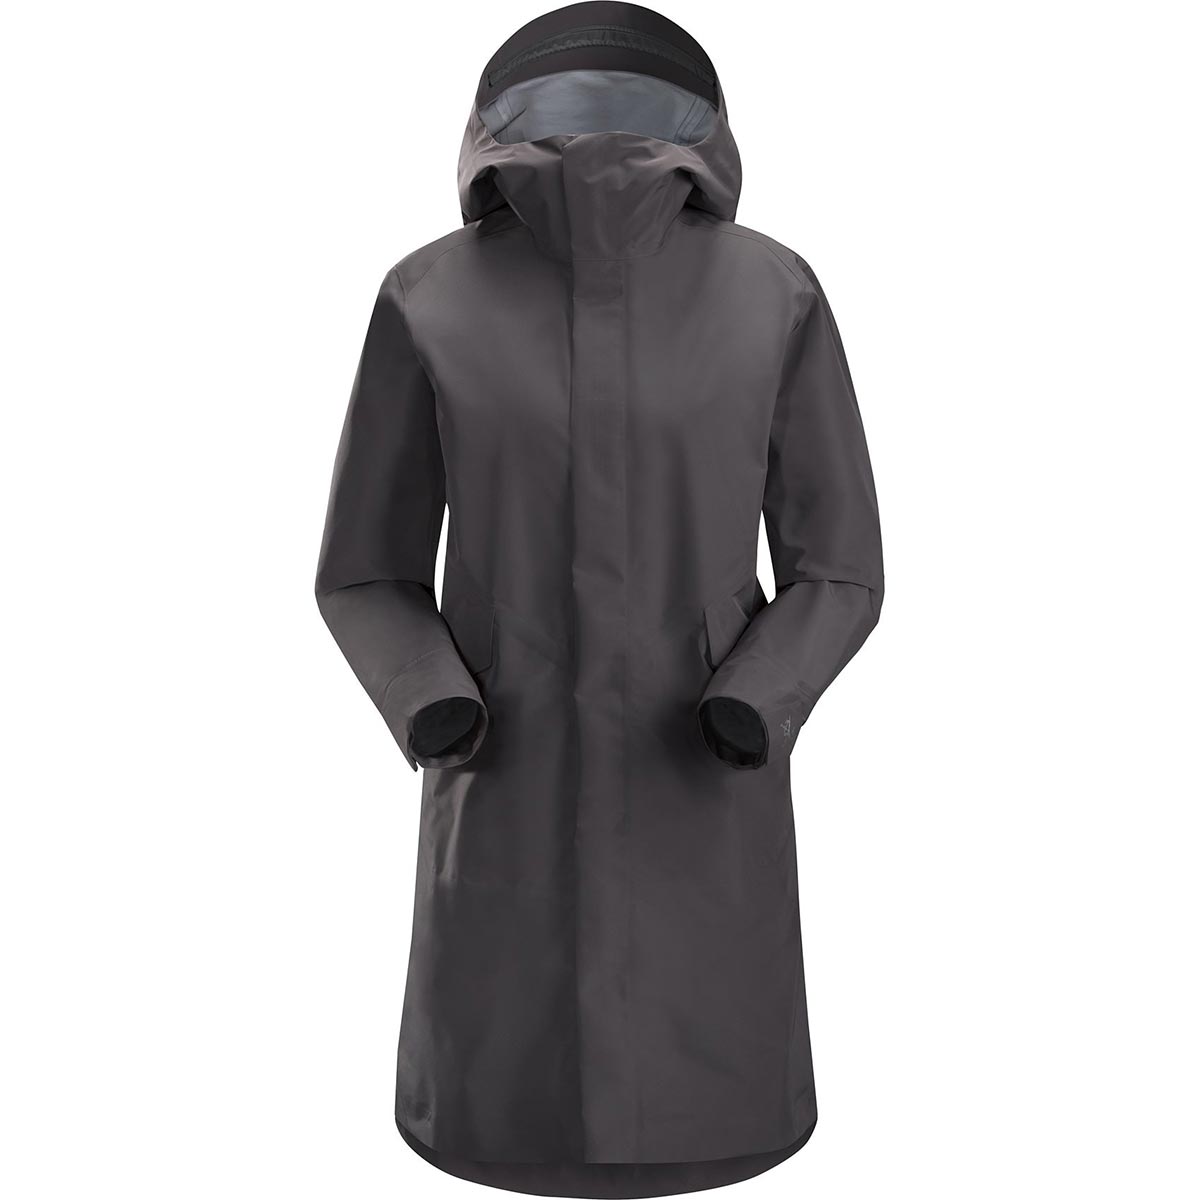 Arc'teryx Andra Coat, women's, discontinued Spring 2019 colors